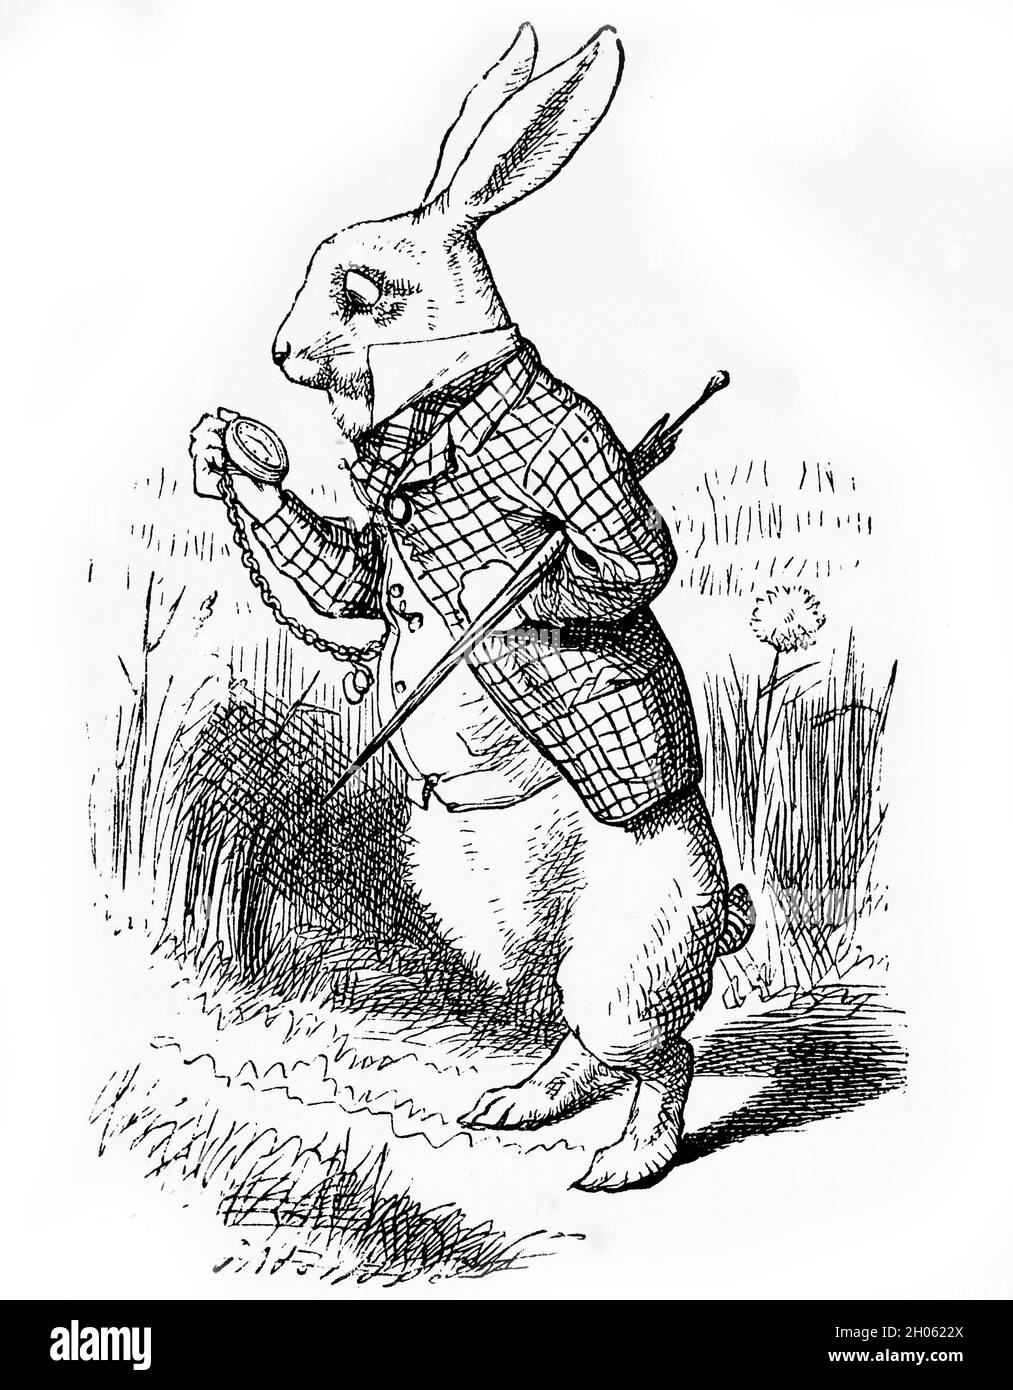 Vinatage Alice in Wonderland illustration by John Tenniel after Lewis Carols story through the looking glass Stock Photo